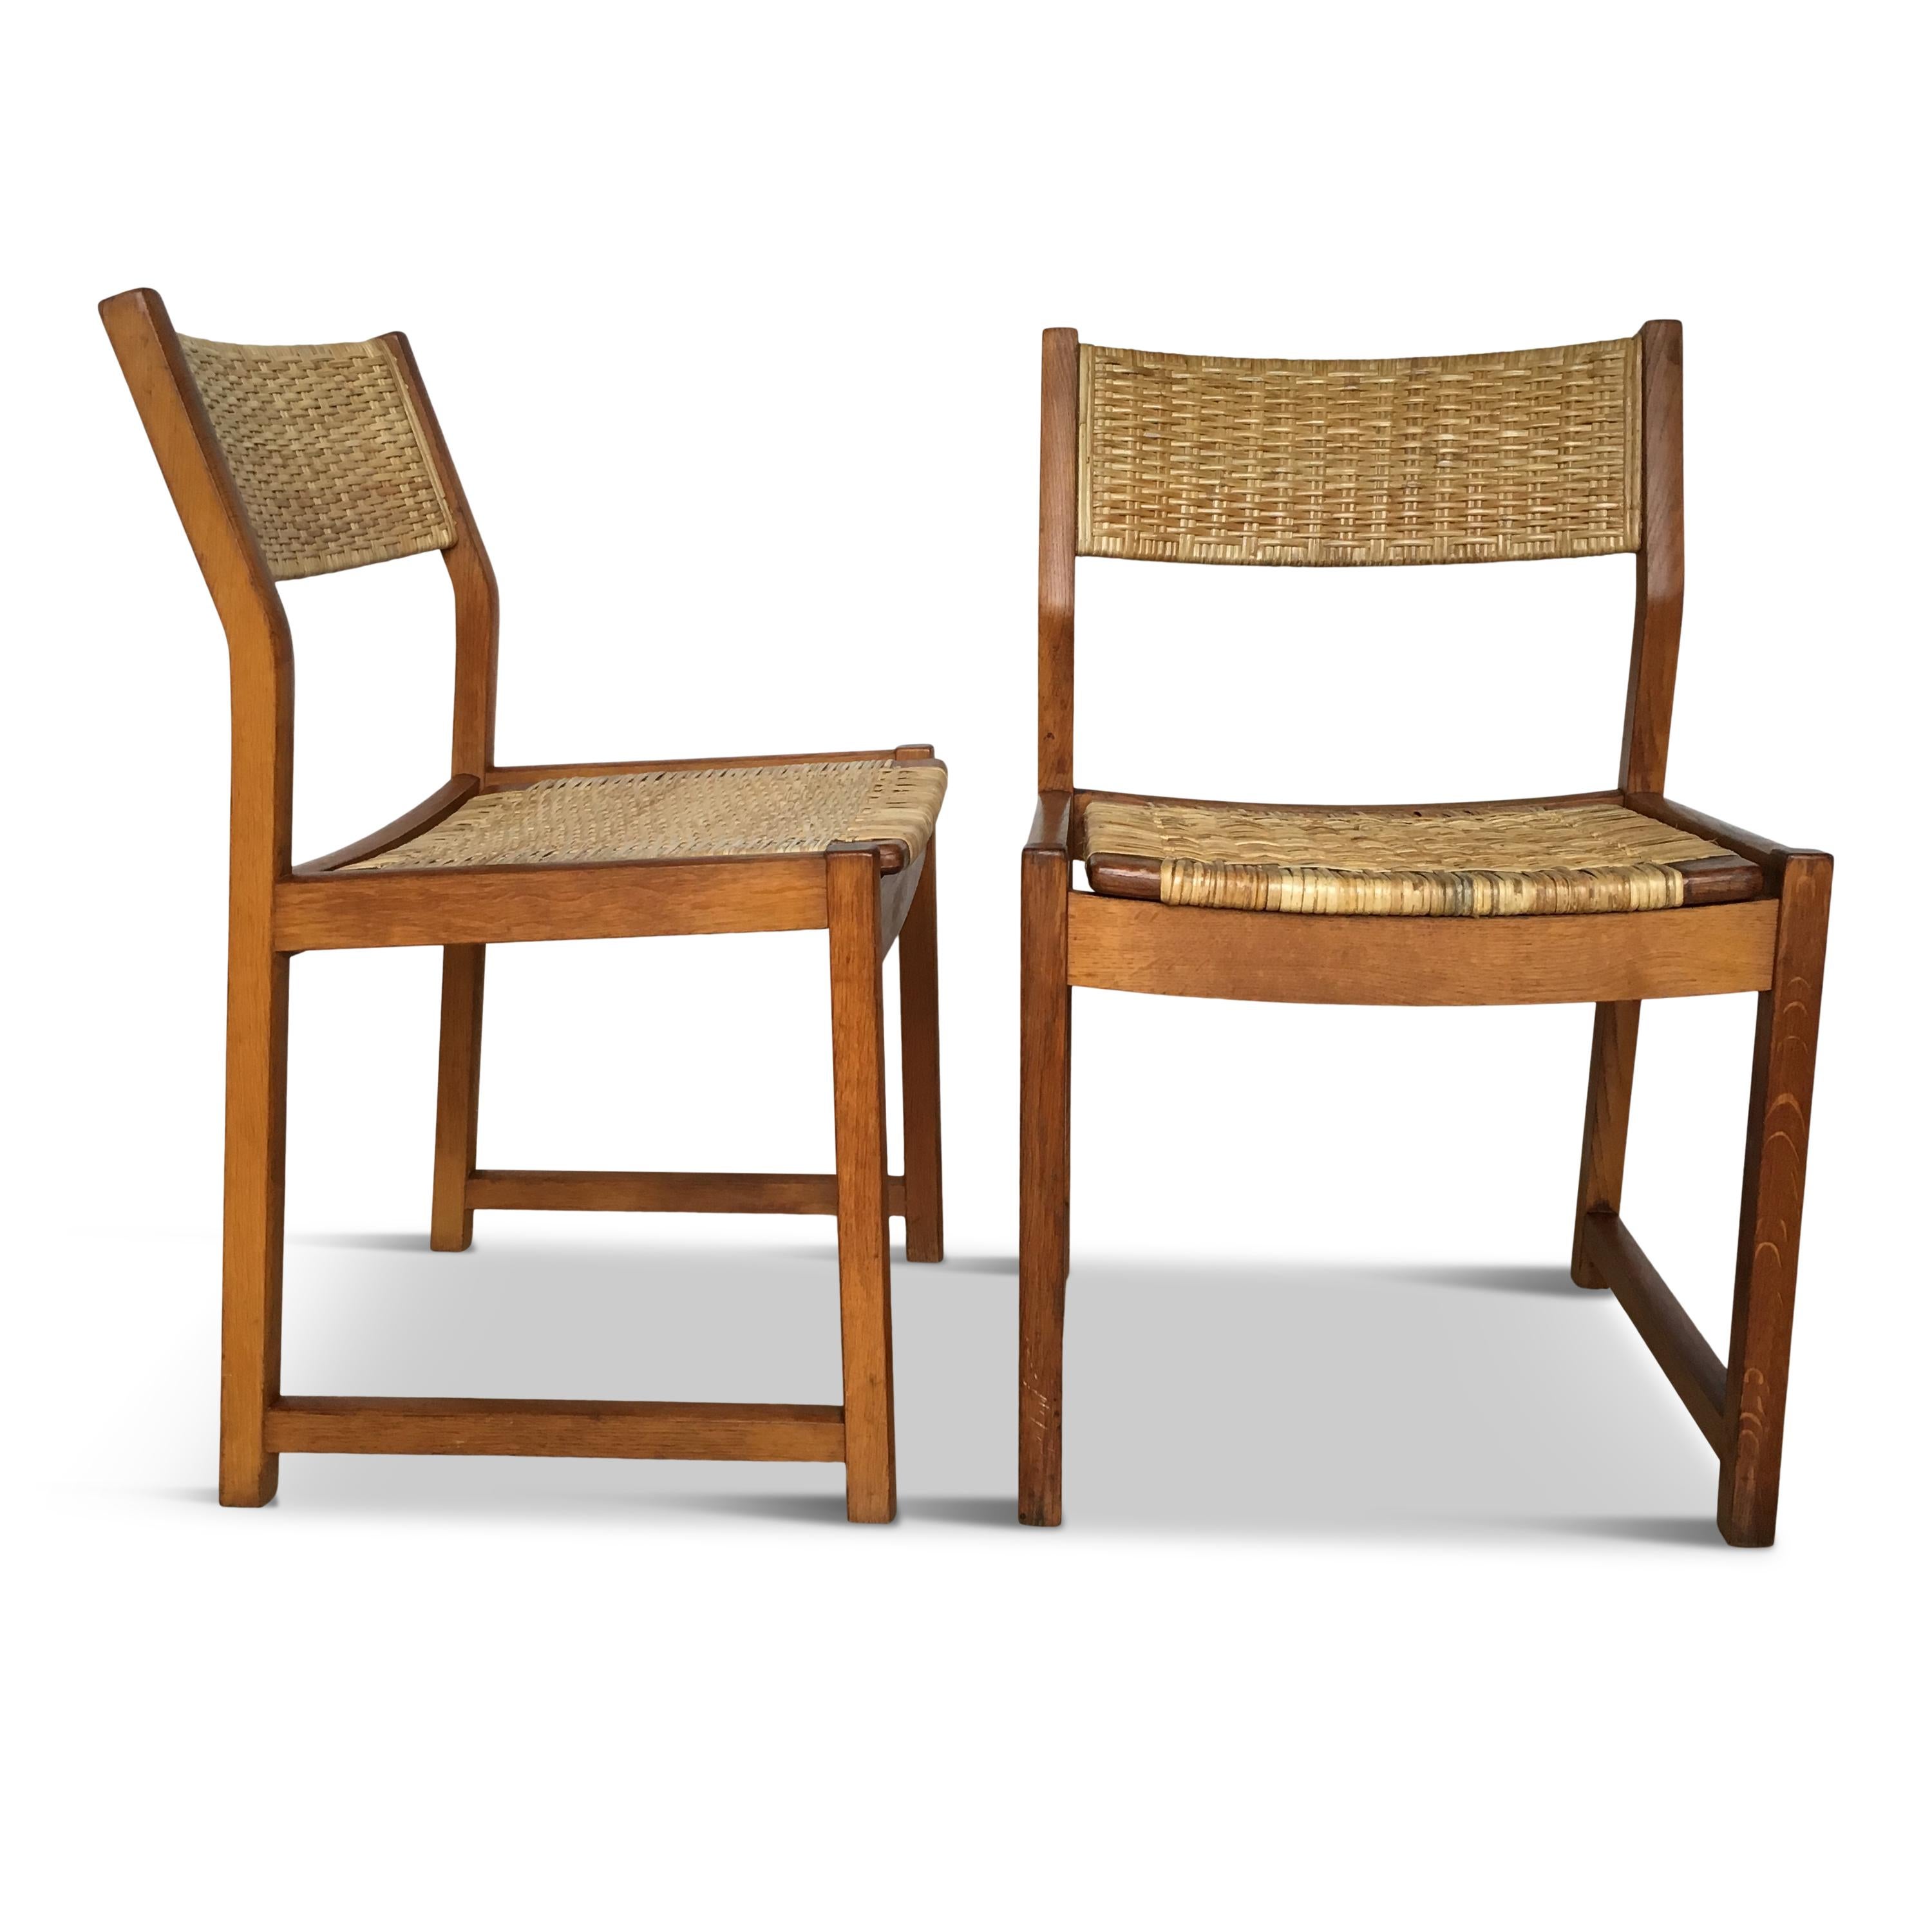 - set of two solid oak chairs with wicker seats dated to 1960
- large and comfortable mid-century dining room chairs or side chairs
- these chairs colour is well combined with teak furniture
    